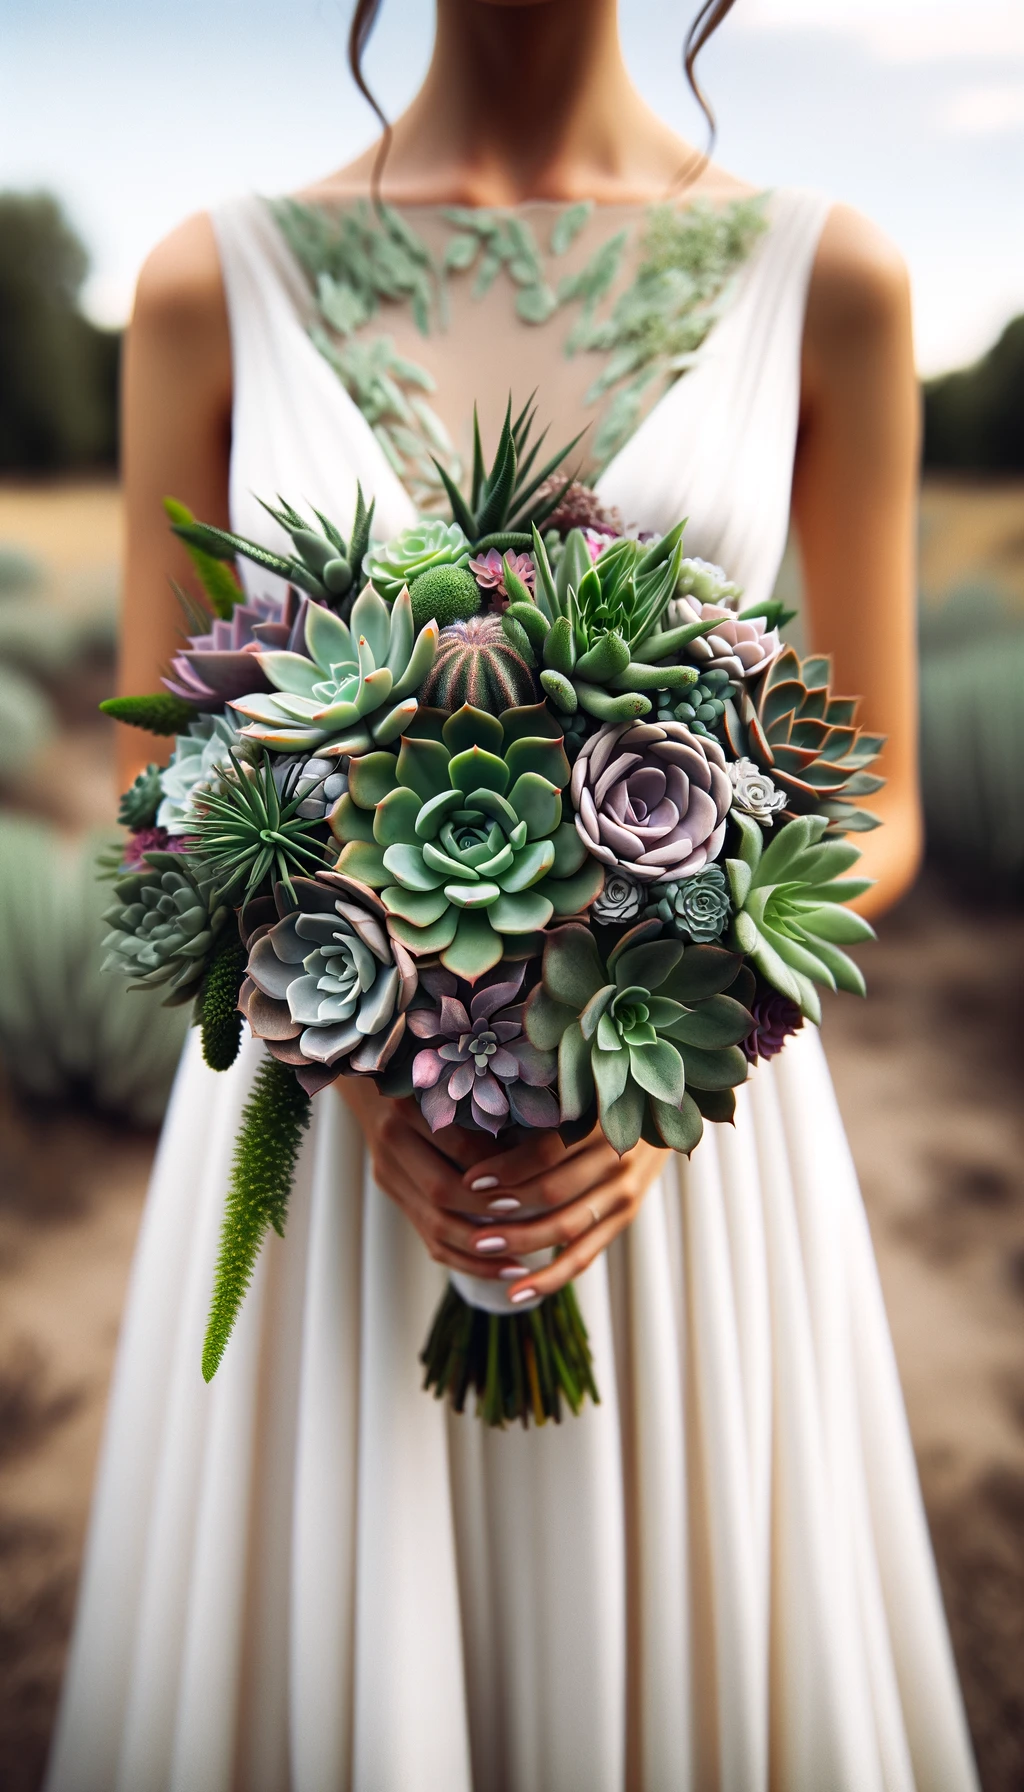 Image of a bride in a white dress holding a lush wedding bouquet of succulents including Echeveria, Sempervivum, and Sedum, featuring green, purple, and pink hues, set against a serene outdoor backdrop